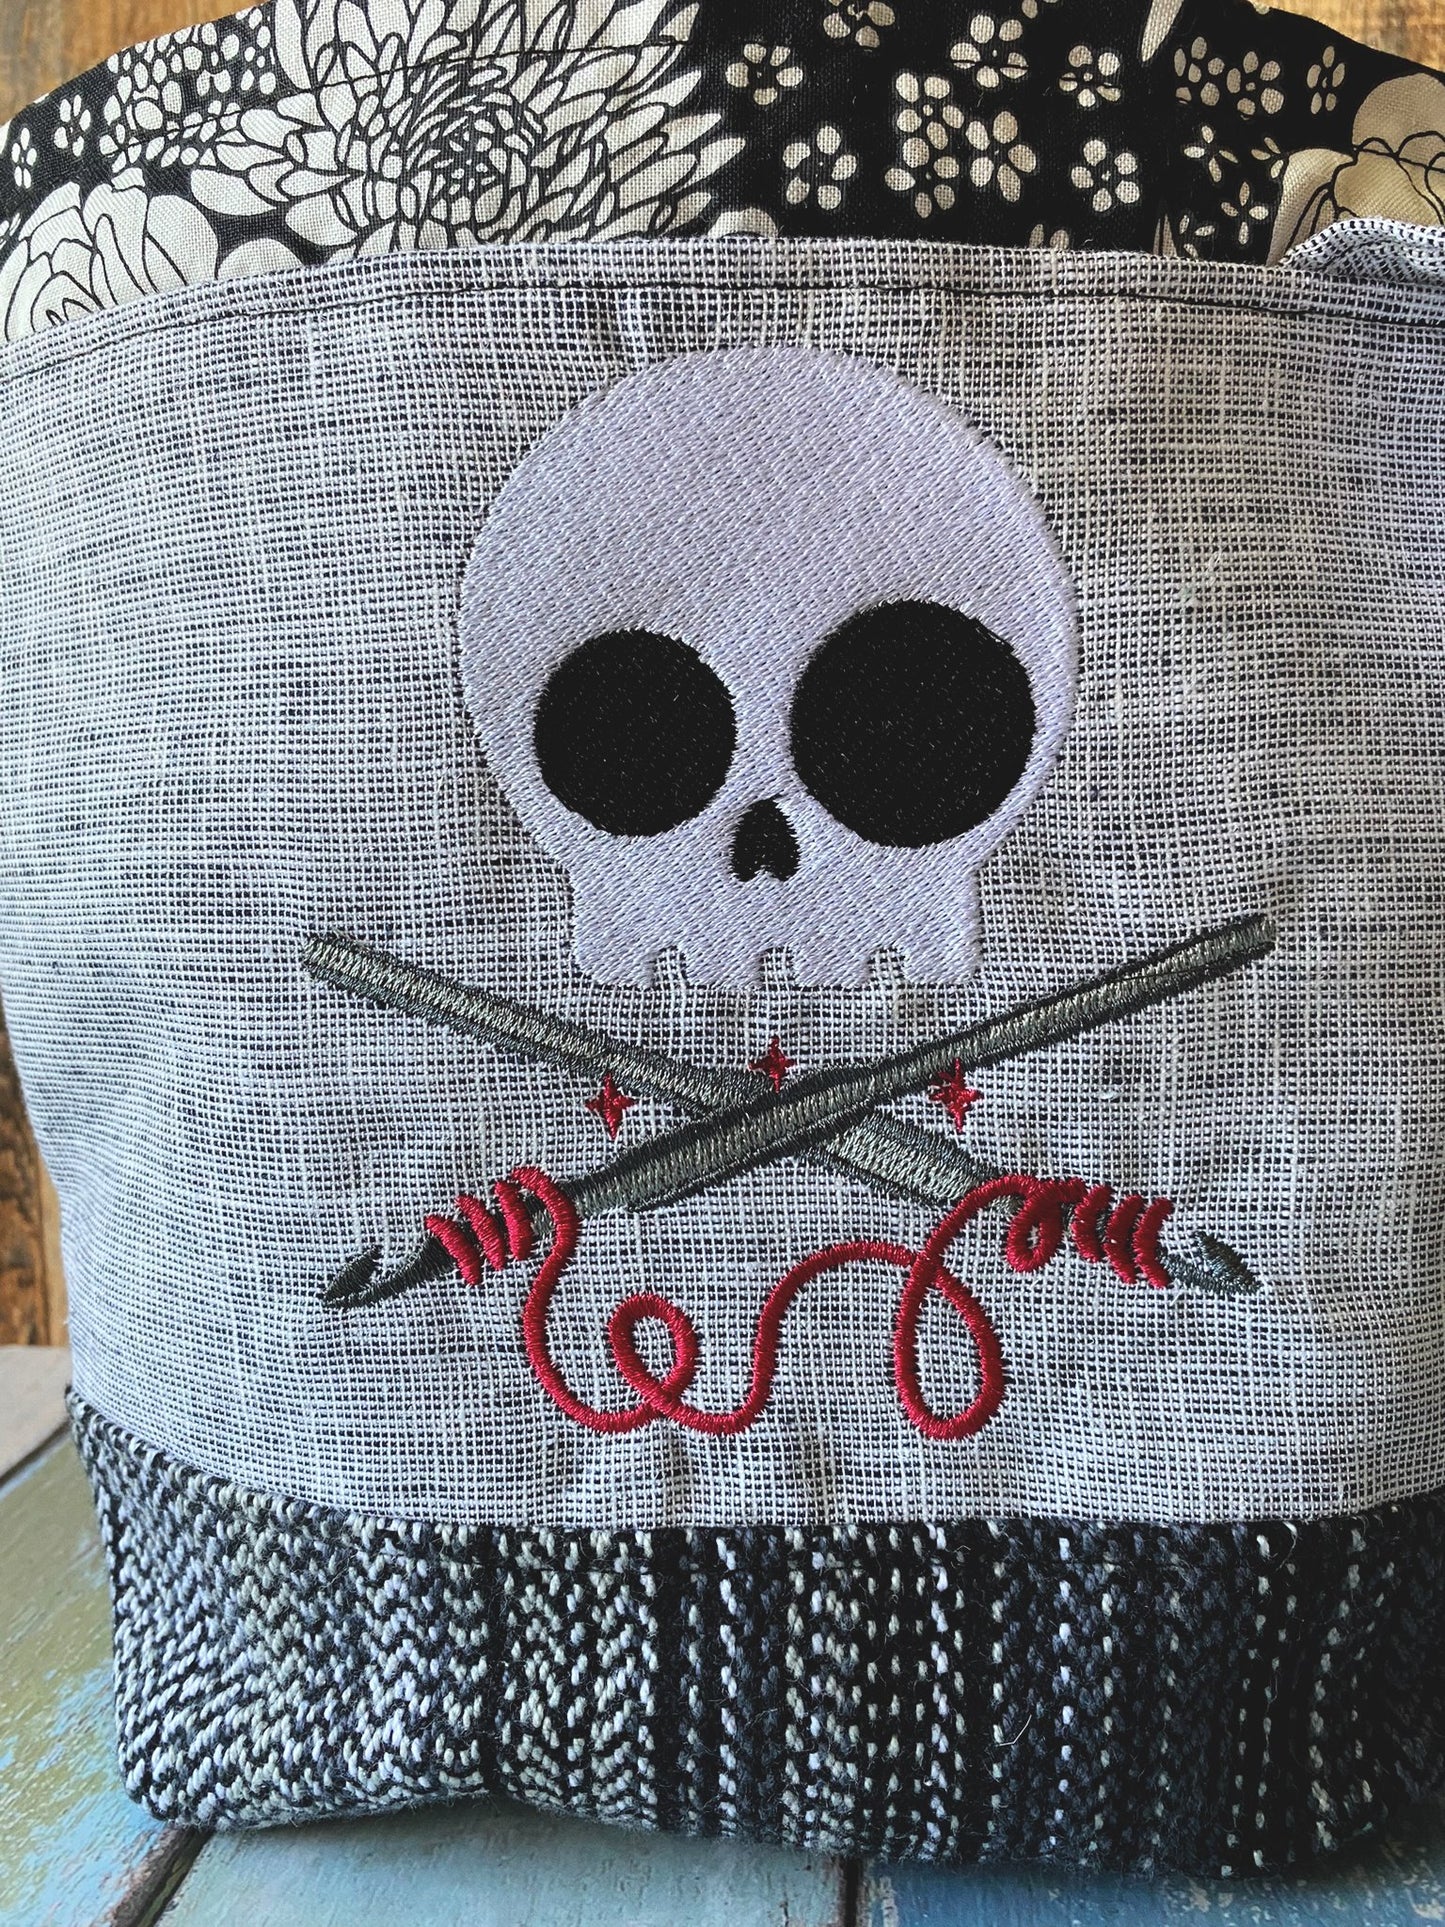 Crochet Takes Balls and Skull Embroidery Small Project Bag